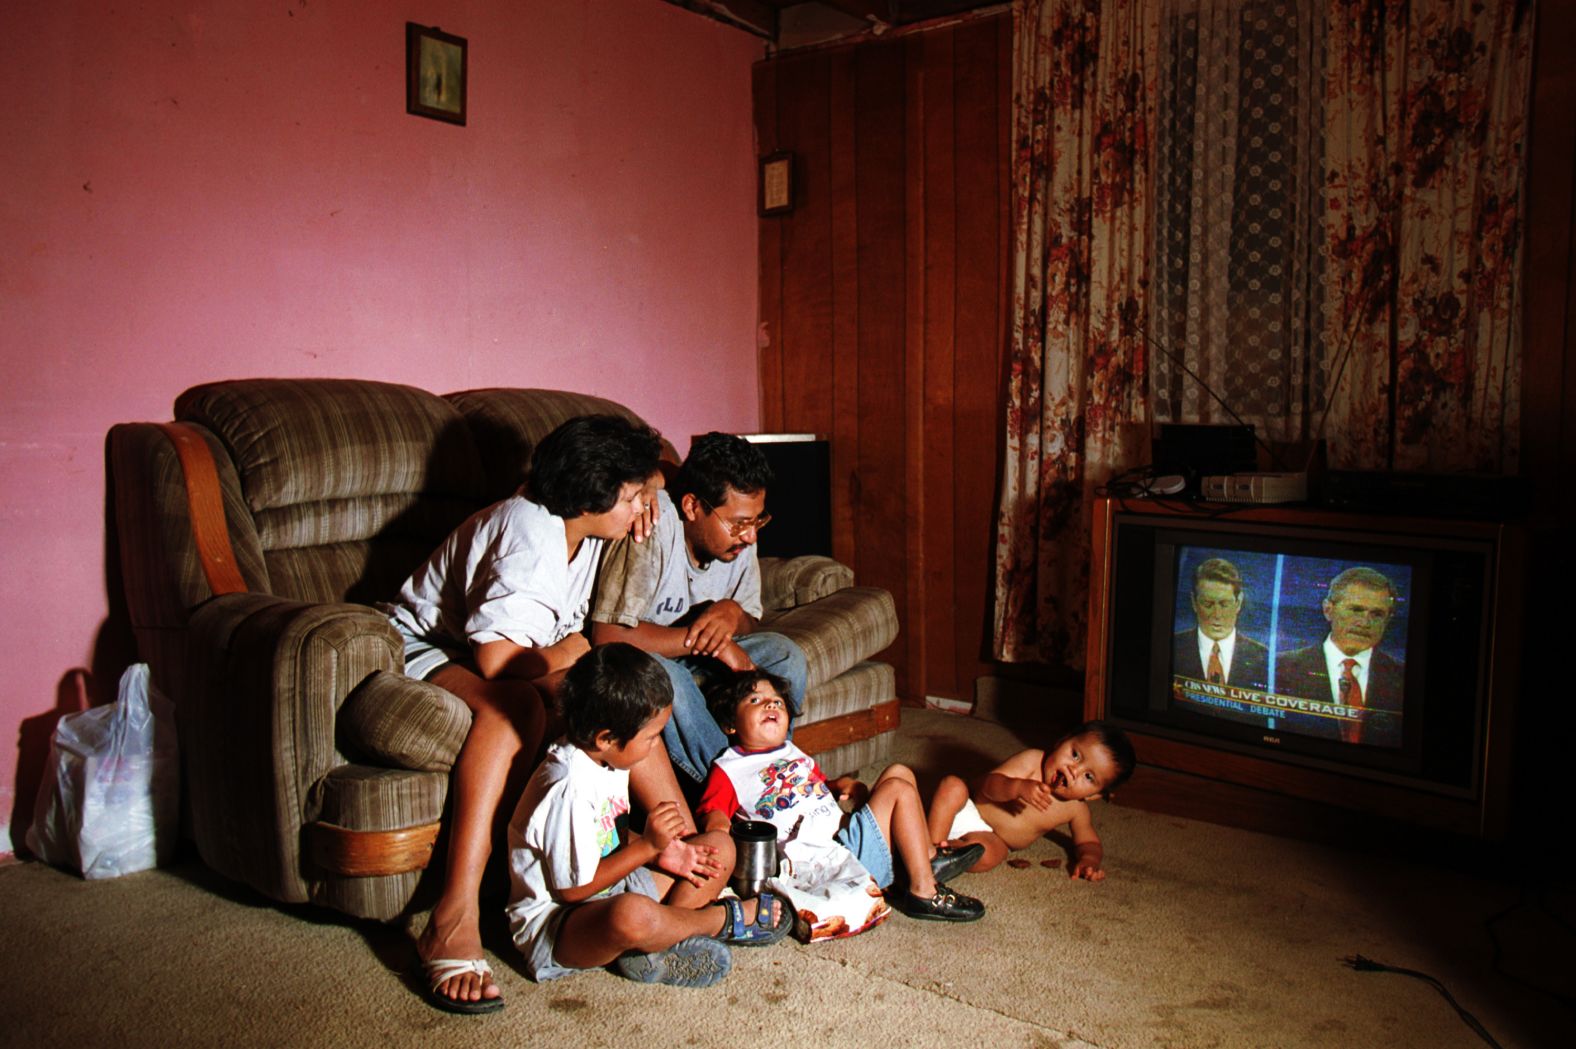 Lorenzo Alvarez is joined by his wife, Angelica, and their three children as they watch the first presidential debate between George W. Bush and Vice President Al Gore in 2000. The couple, which lived on the outskirts of El Paso, Texas, was still undecided about which candidate they would vote for.